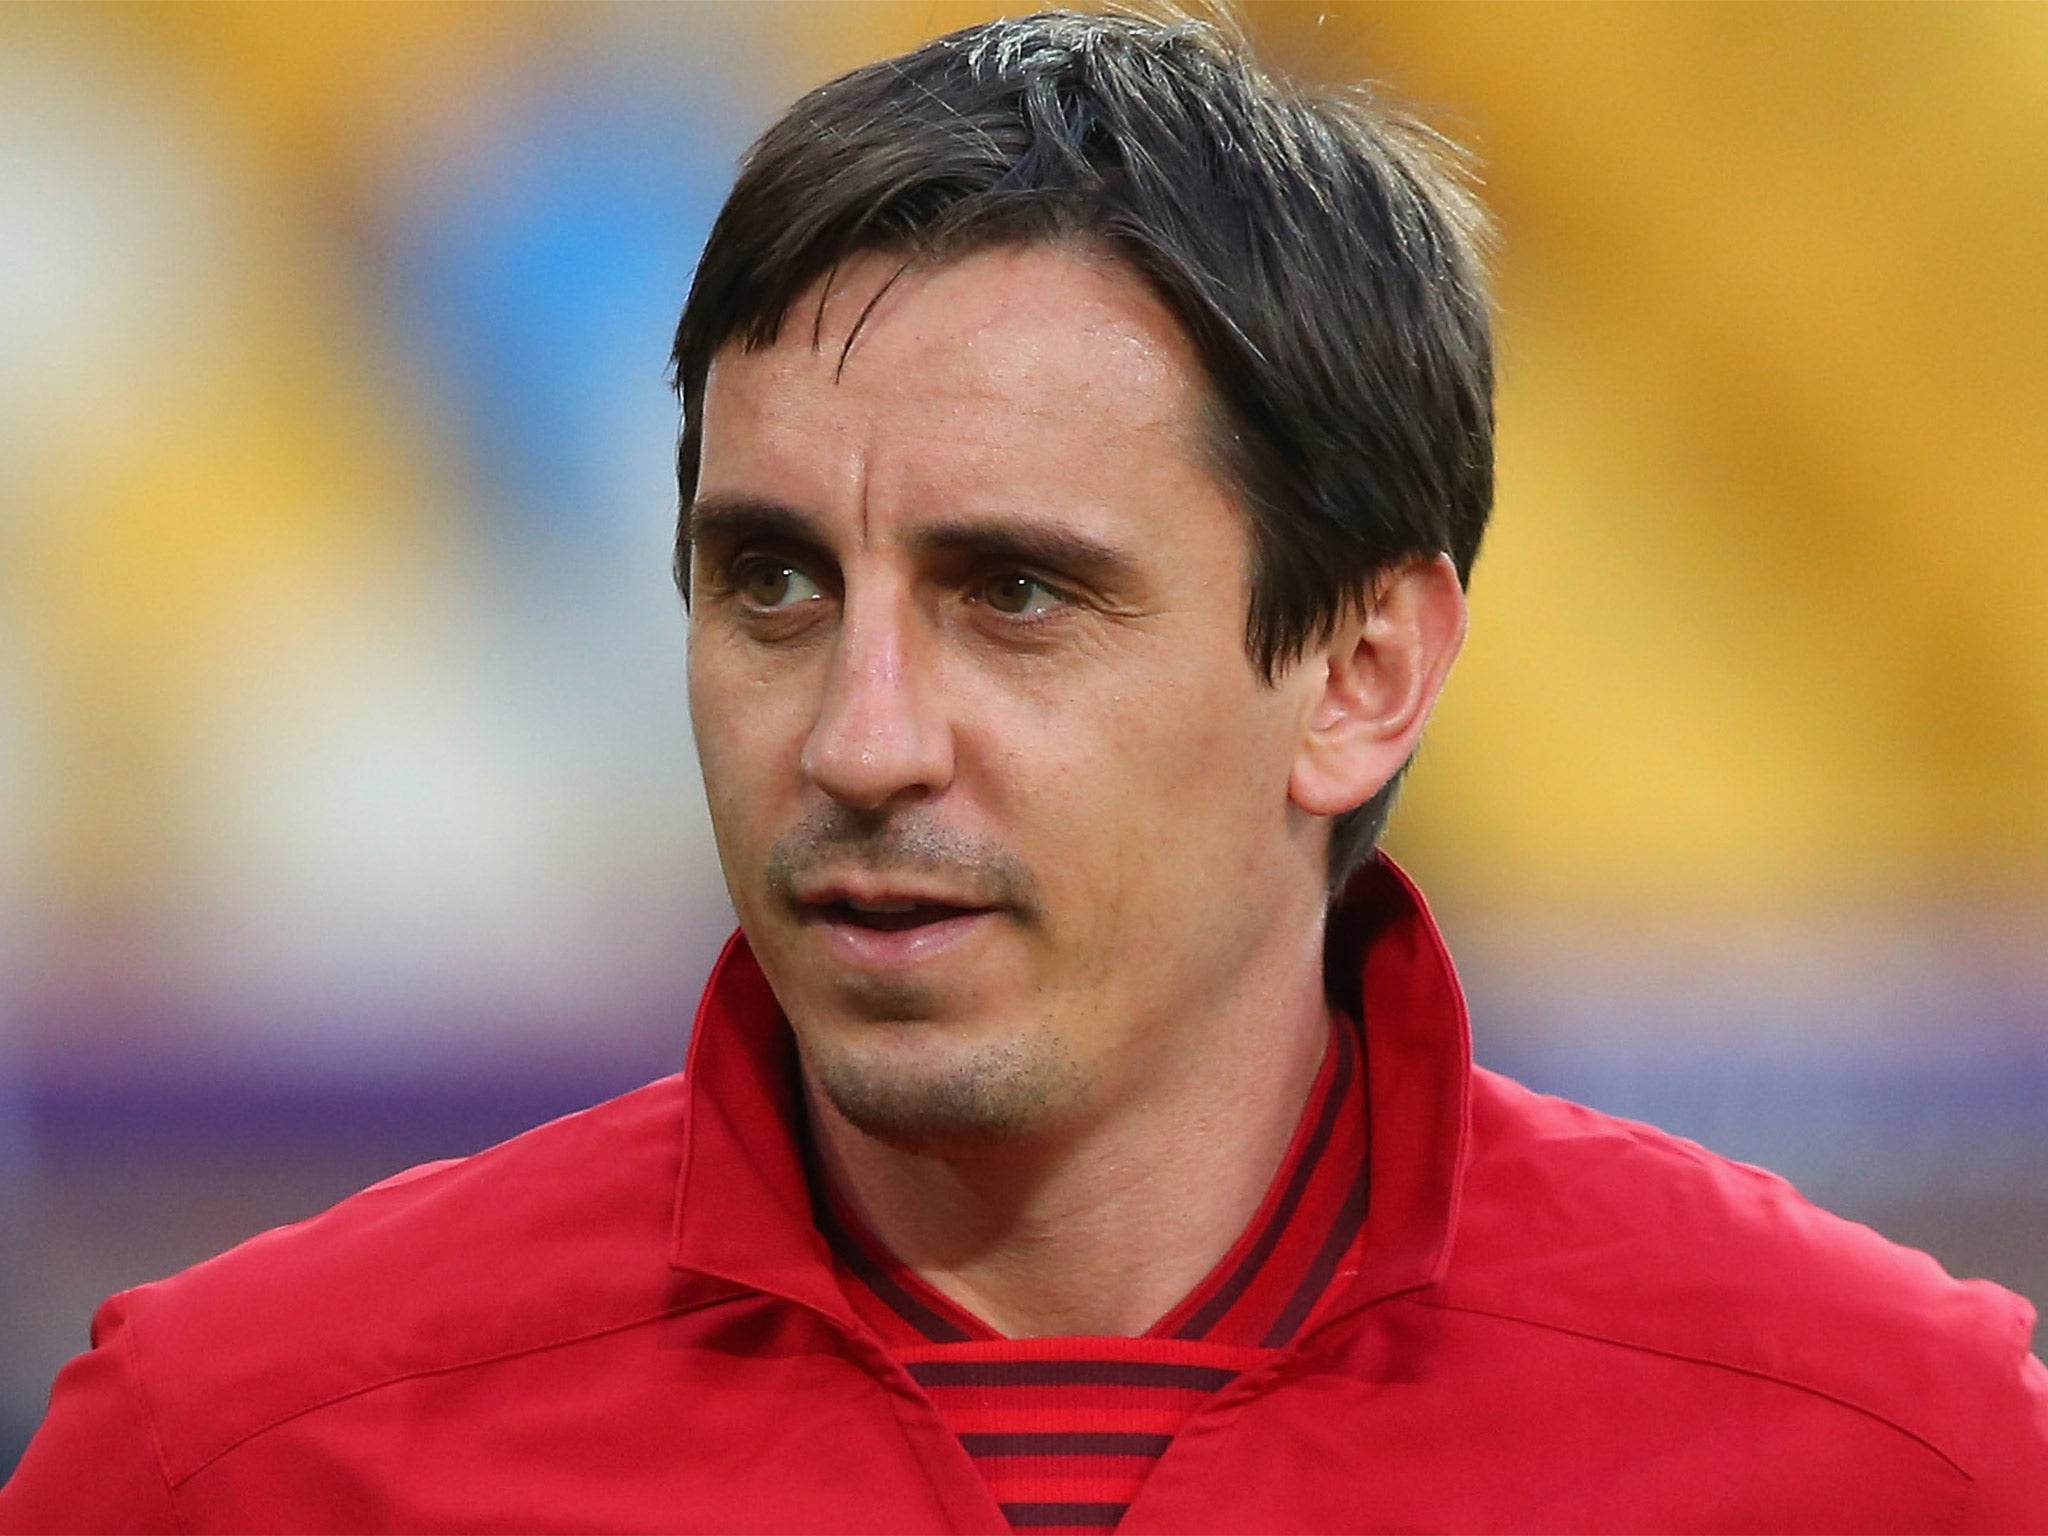 Gary Neville’s first match in charge will be a key Champions League encounter next week